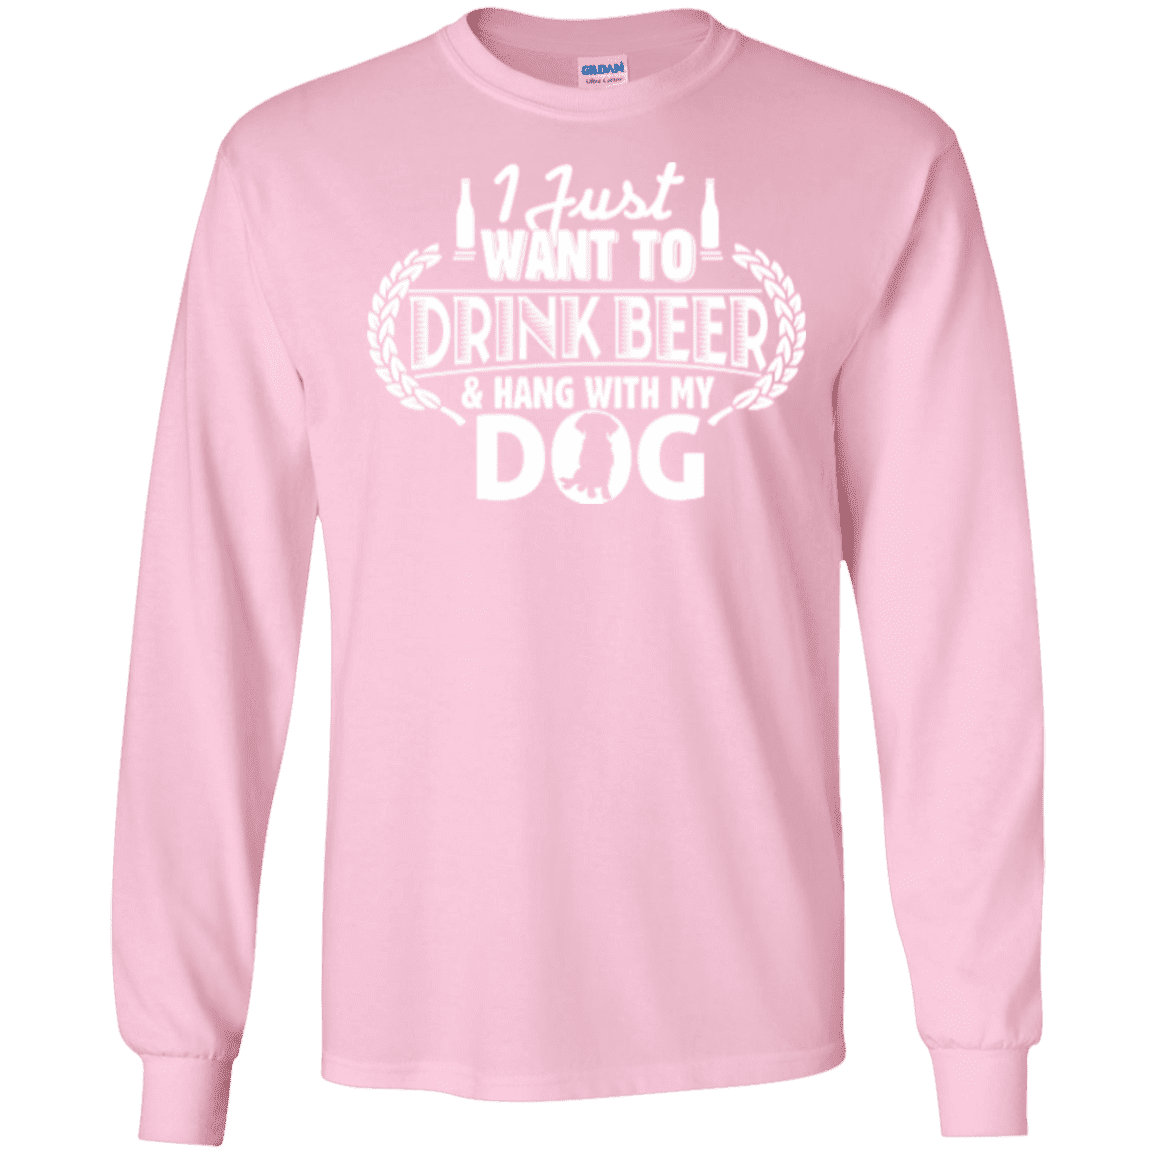 Drink Beer Hang With My Dog - Long Sleeve T Shirt.